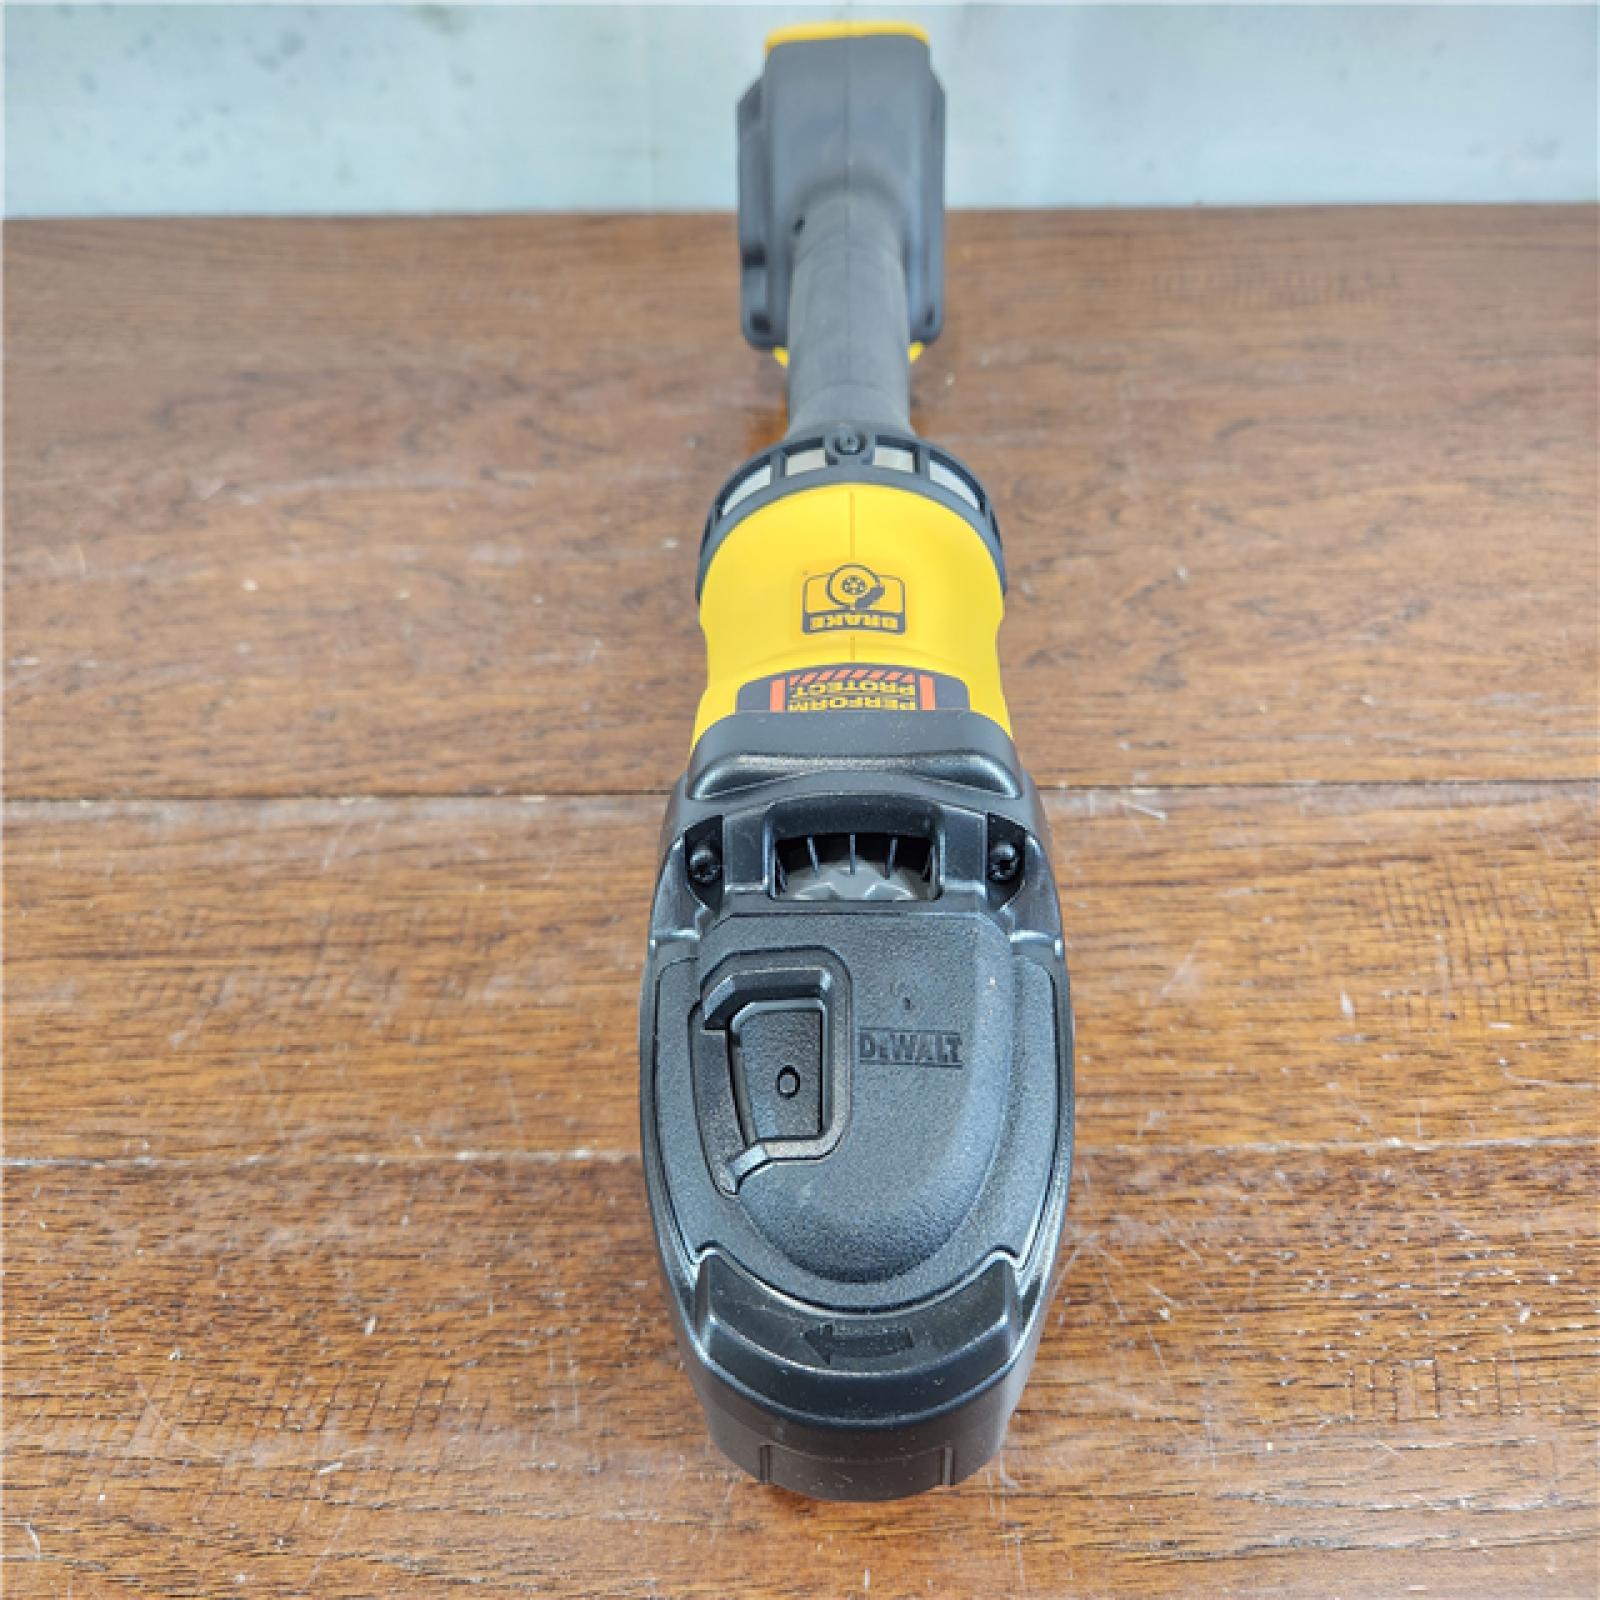 AS-IS DeWalt 60V MAX Brushless Cordless 7 In. Angle Grinder (Tool Only)